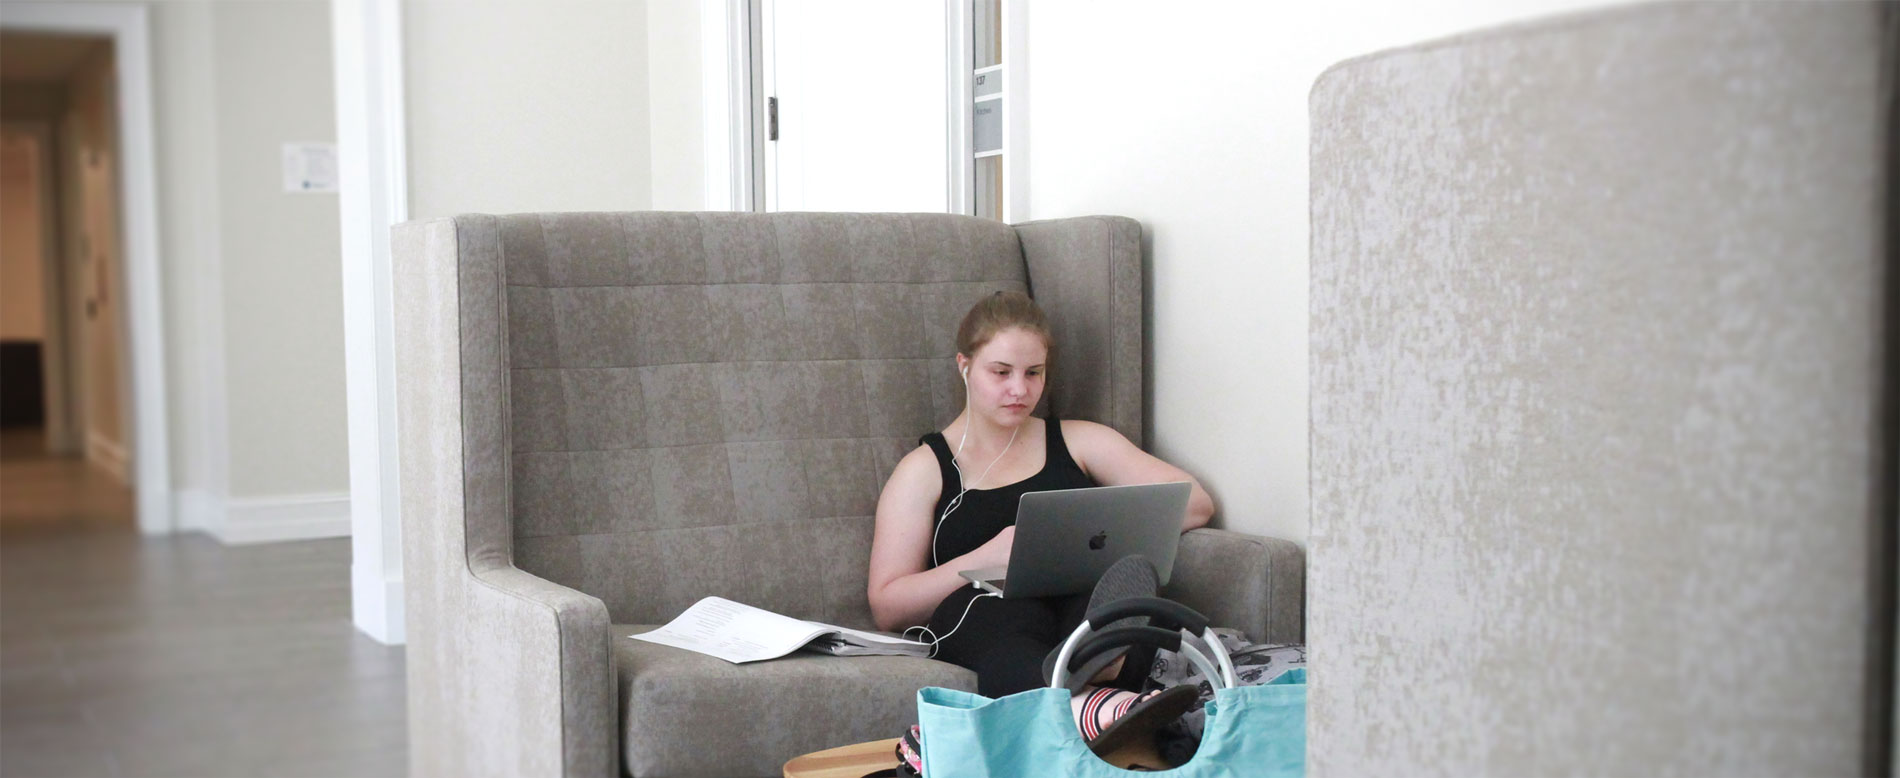 Student sits in high-backed comfortable chair in common area